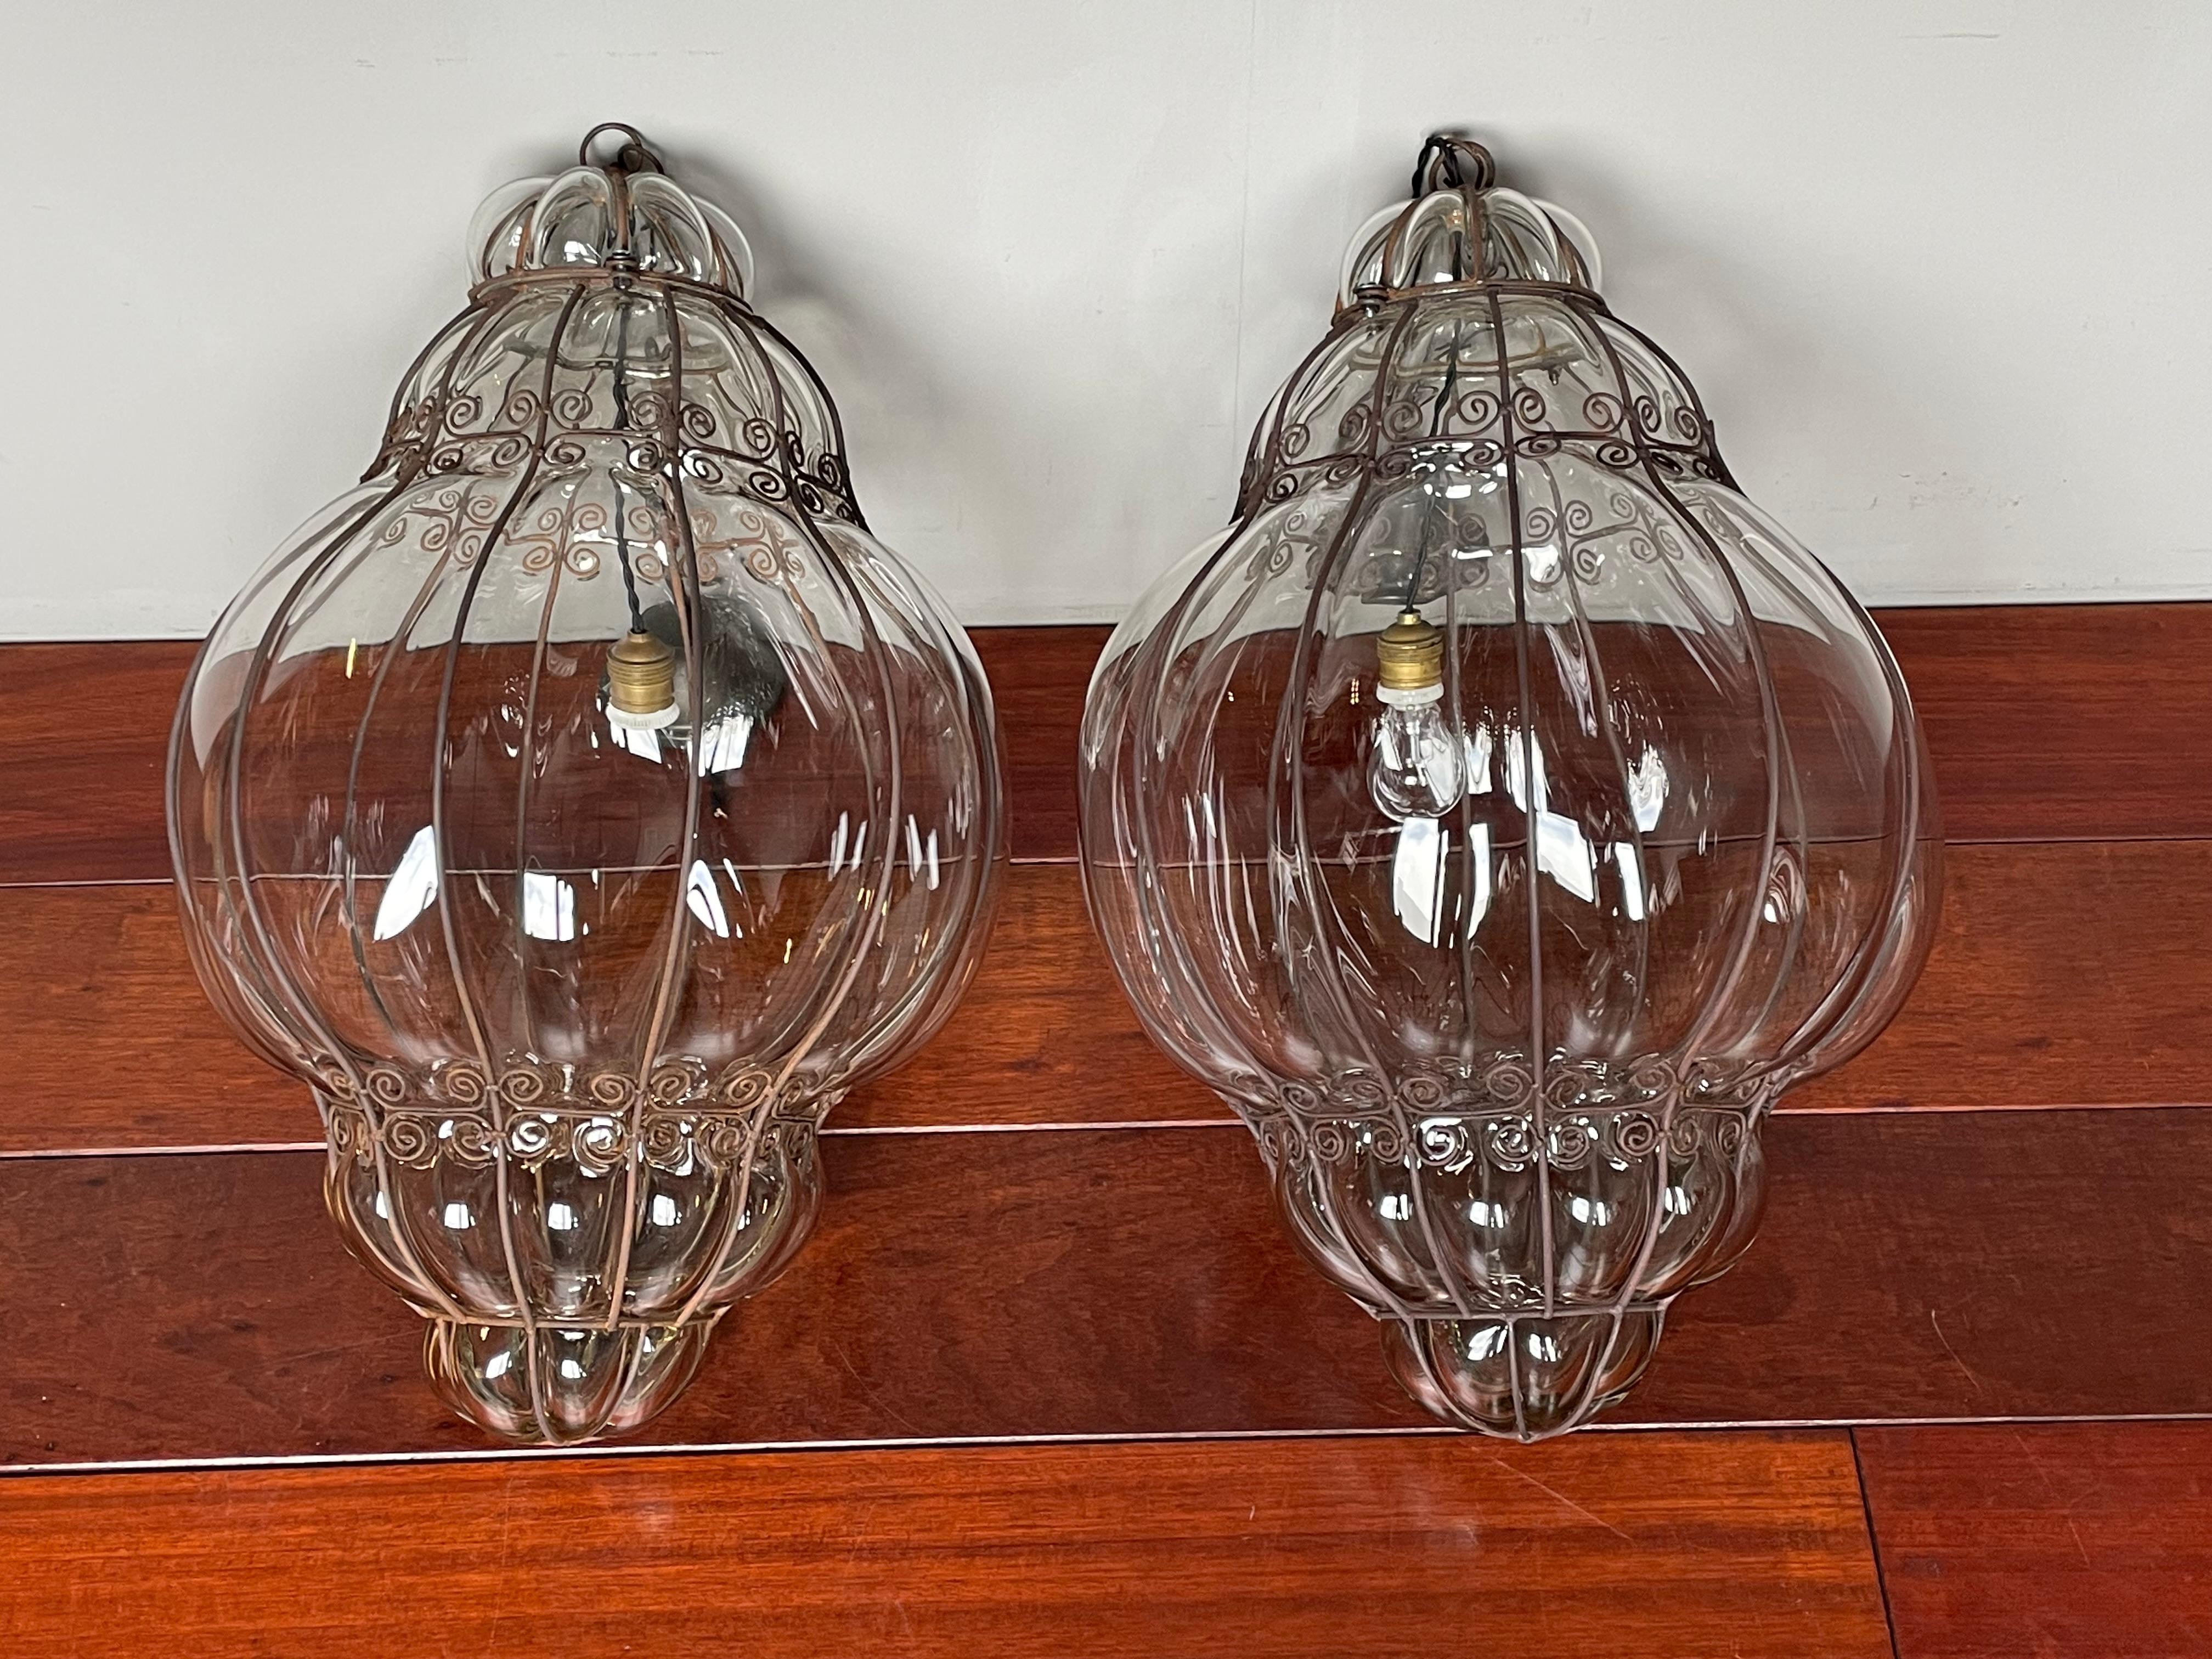 Extra large and superb condition, pair of vintage Murano mouth blown chandeliers.

To give you a better idea of the extra large and wonderful size of these striking Murano fixtures we have added images 5, 13 and 19 where they are placed next to one